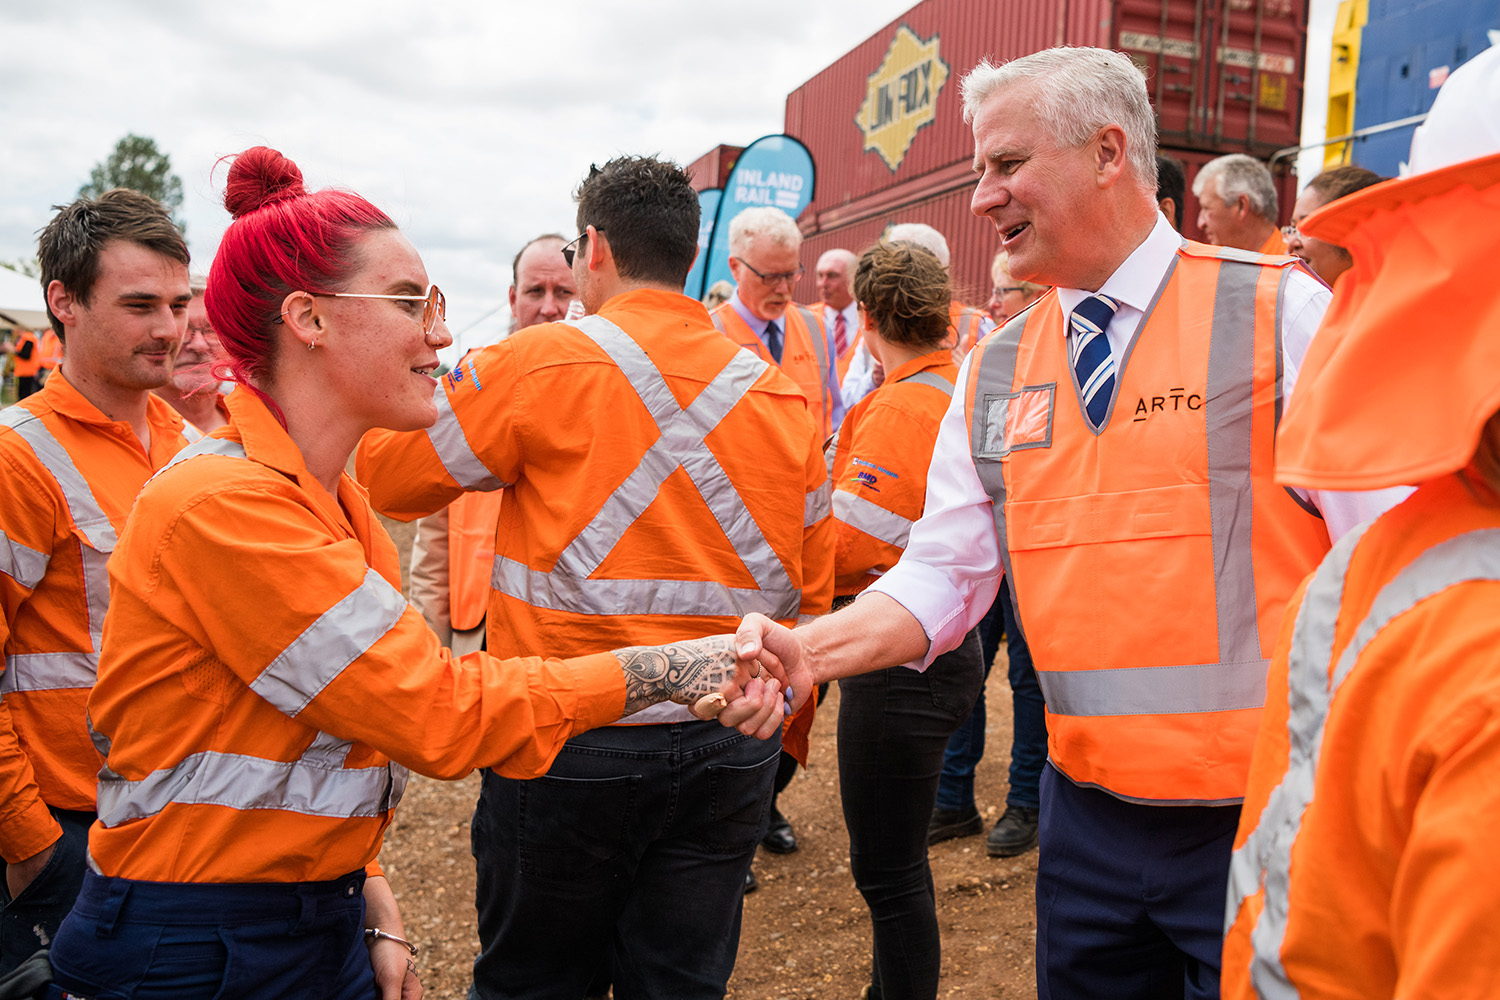 Deputy Prime Minister Michael McCormack shaking hands with InLink employee